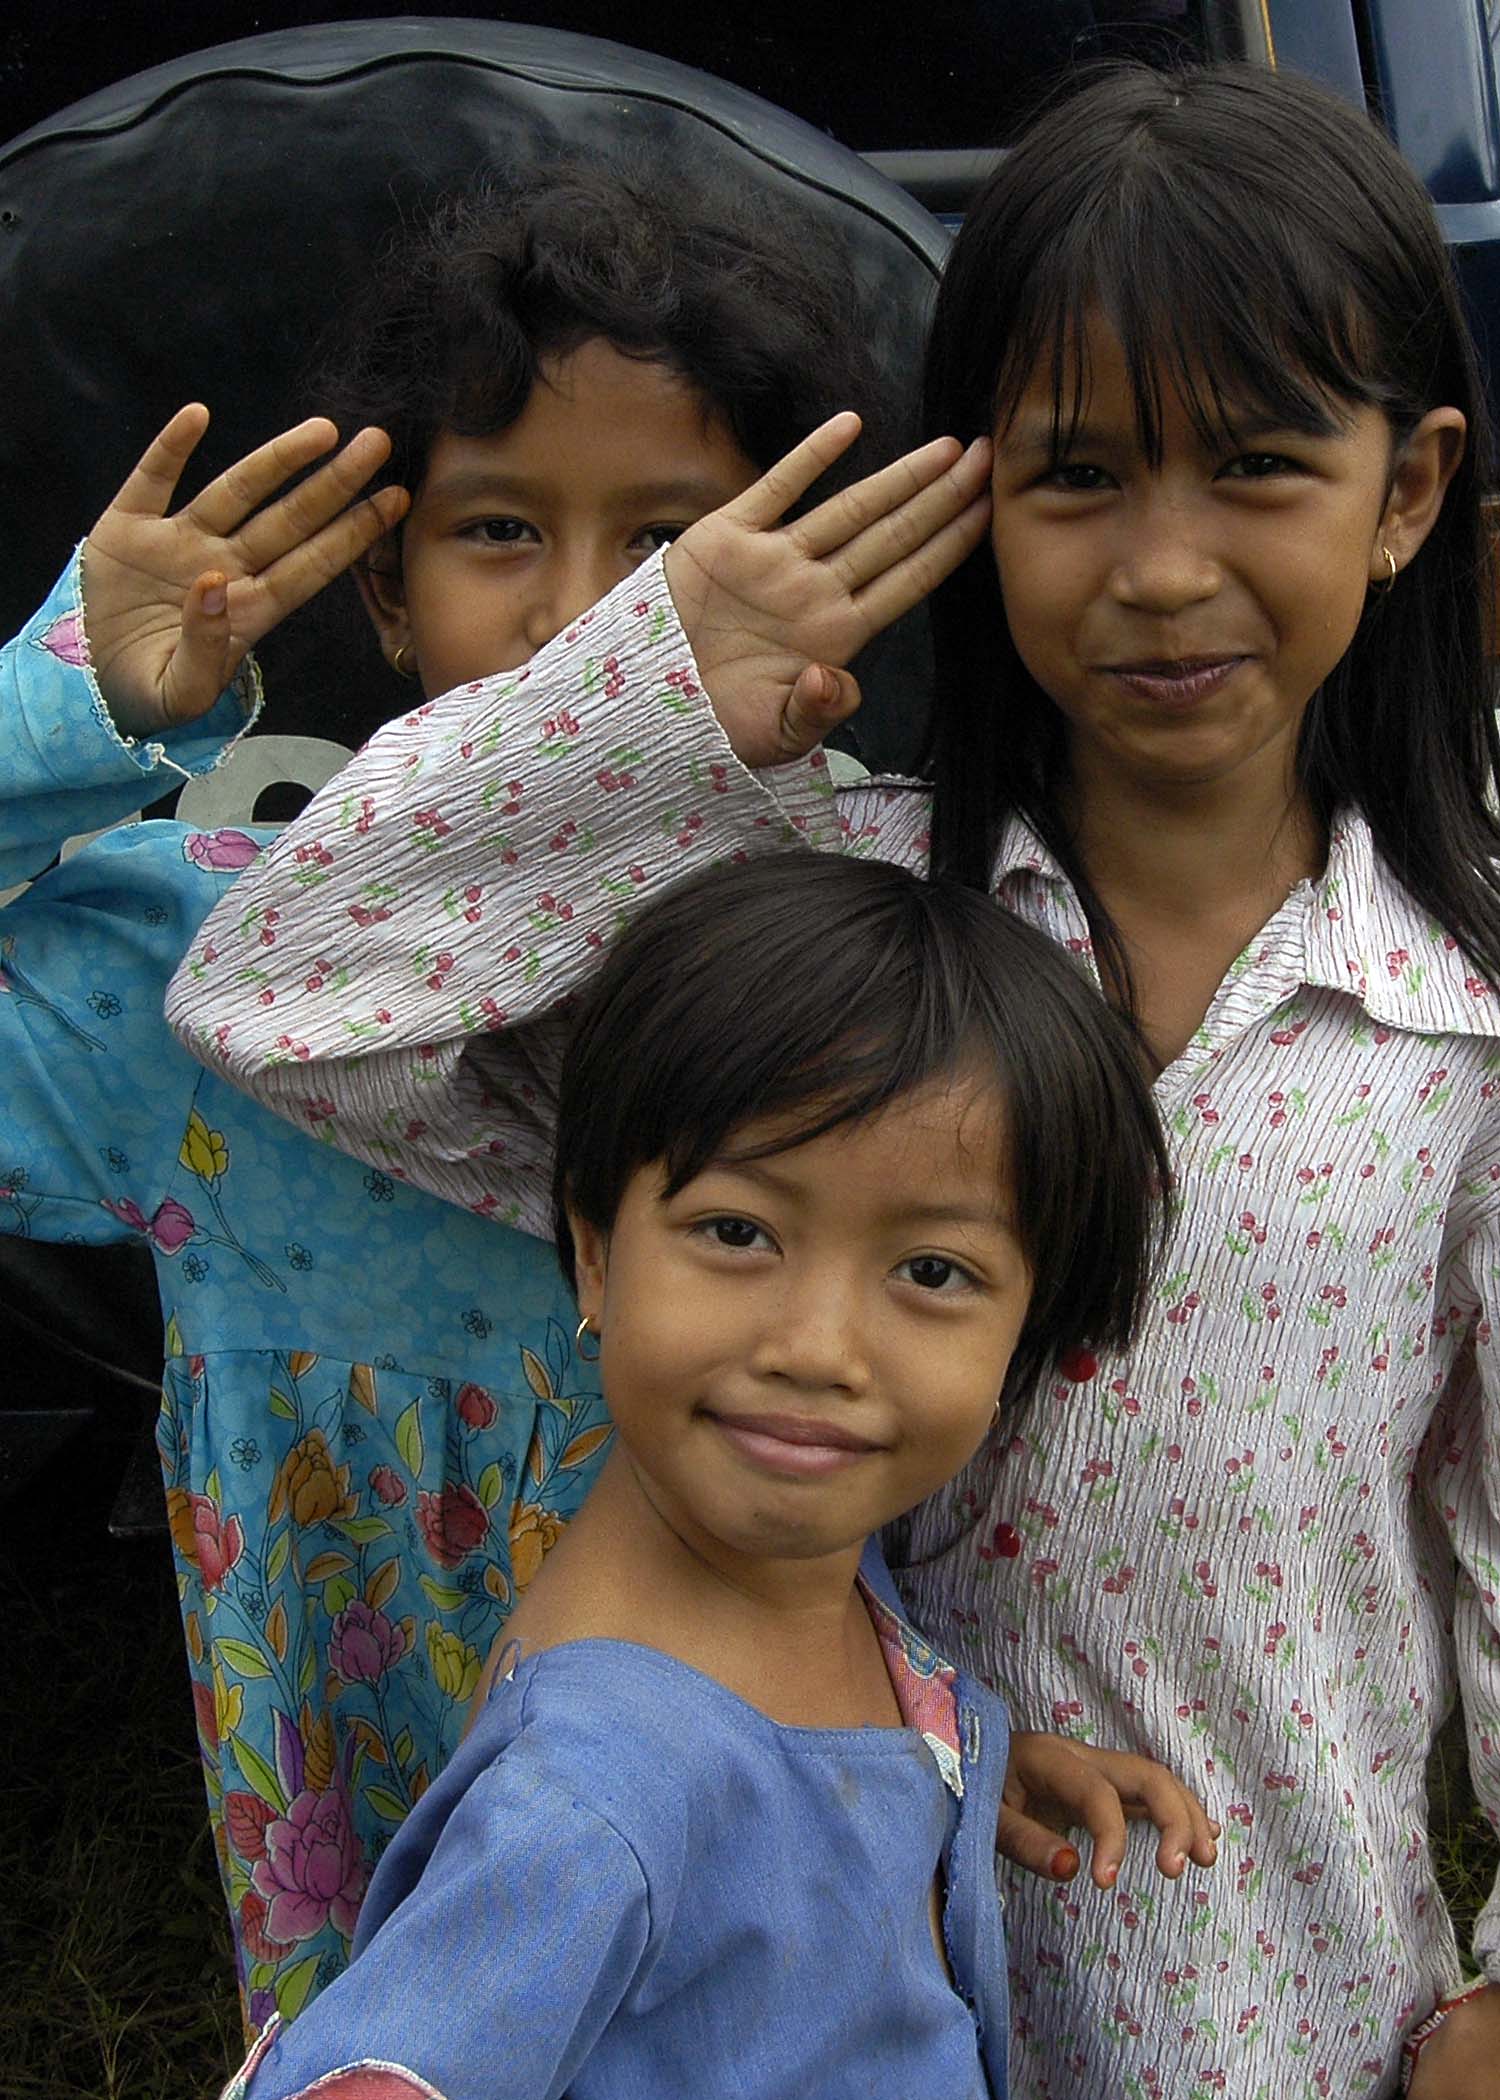 US Navy 050119-N-9951E-067 Young girls salute in their best form for a photo taken at one of the camps located in the town of Alue Bilie, Aceh, for civilians displaced by the Dec. 26 tsunami